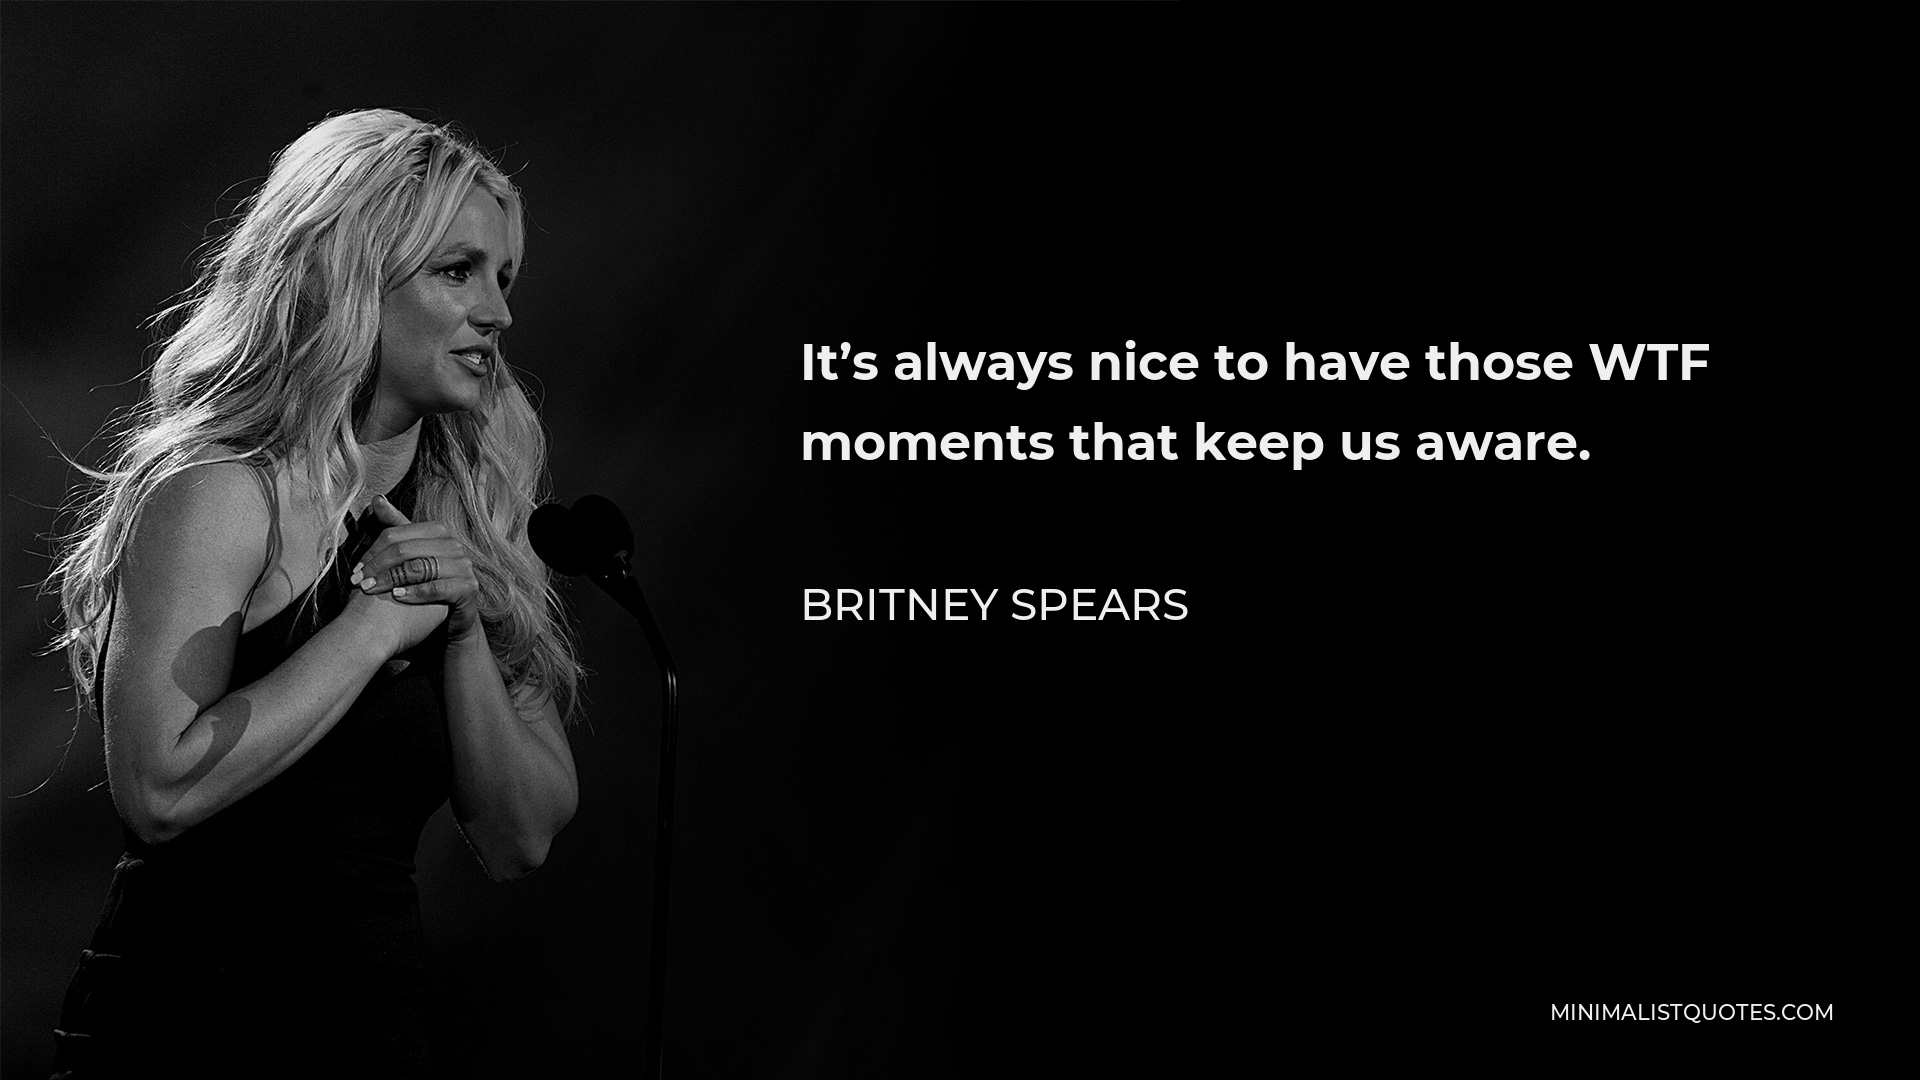 Britney Spears Quote It S Always Nice To Have Those Wtf Moments That Keep Us Aware